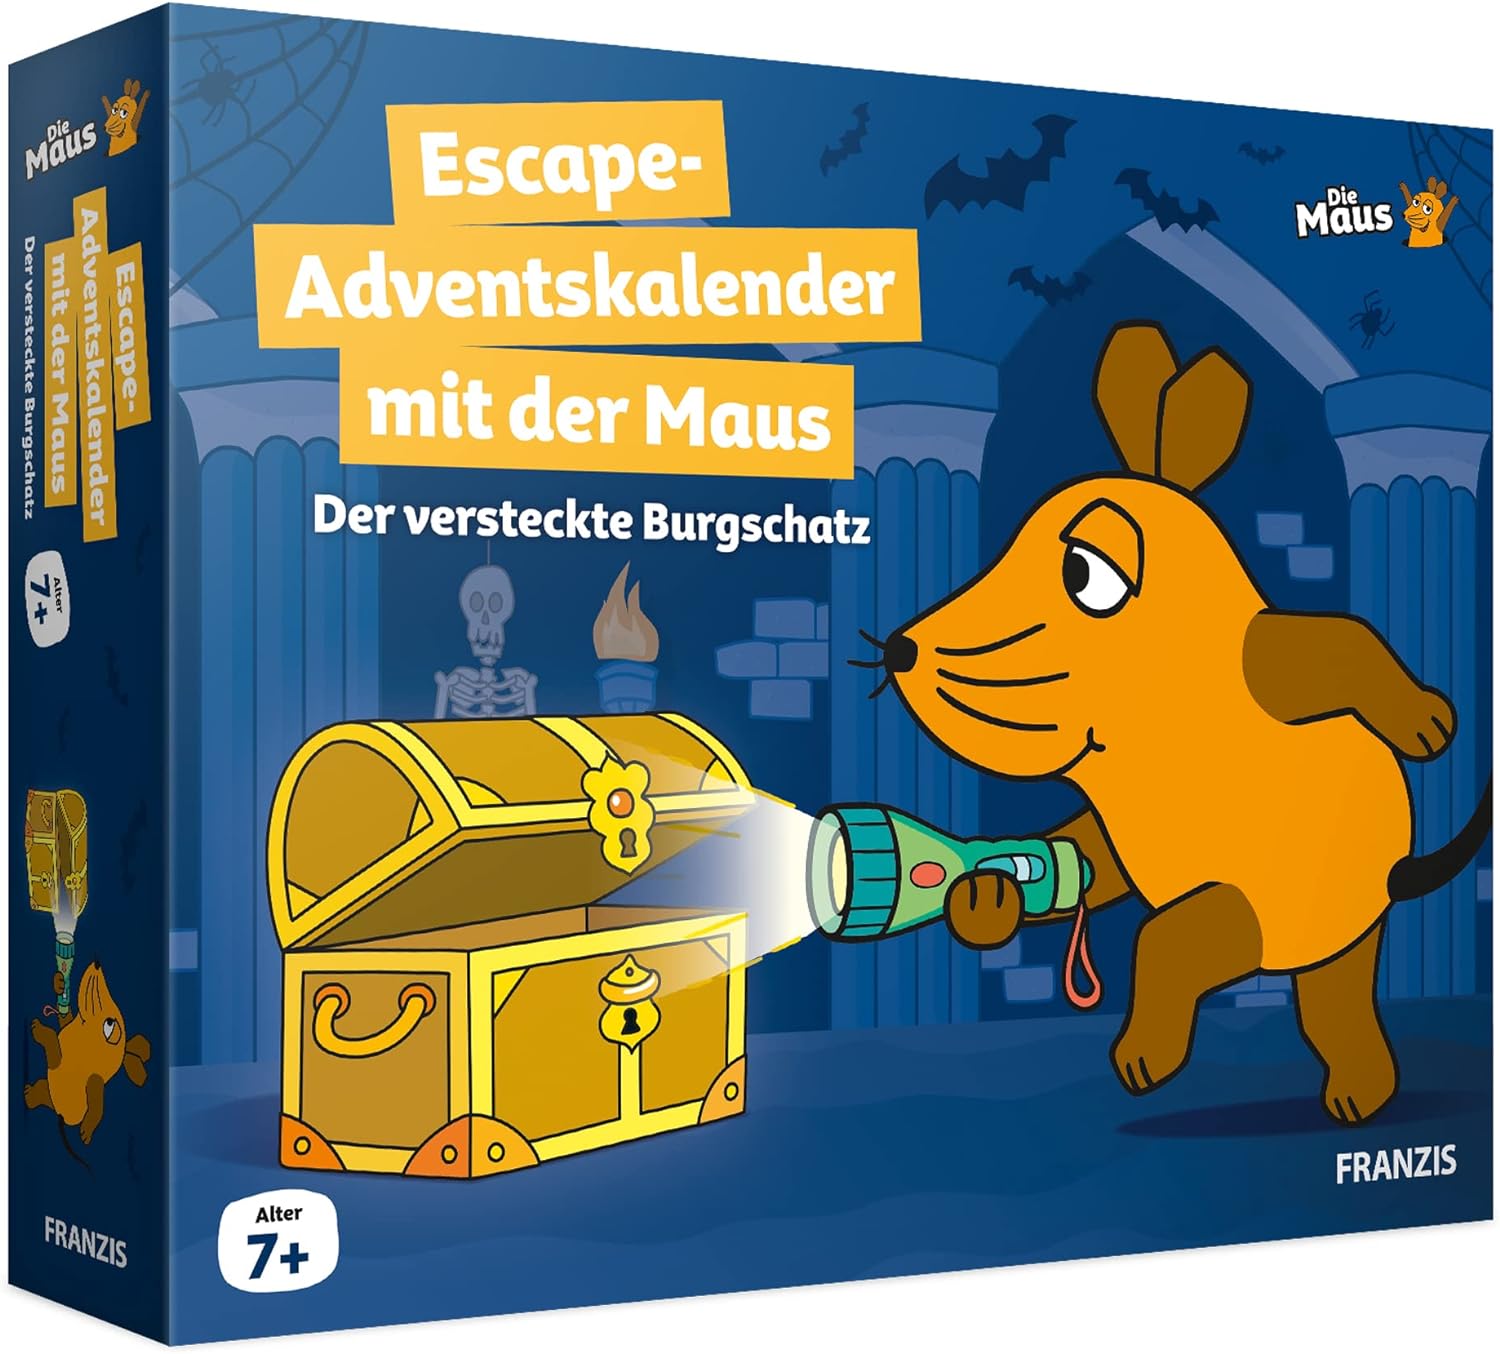 FRANZIS 67169 - Escape Advent Calendar with the Mouse - The Hidden Castle Treasure, 24 Exciting Puzzles for the Advent Season, for Children from 7 Years
